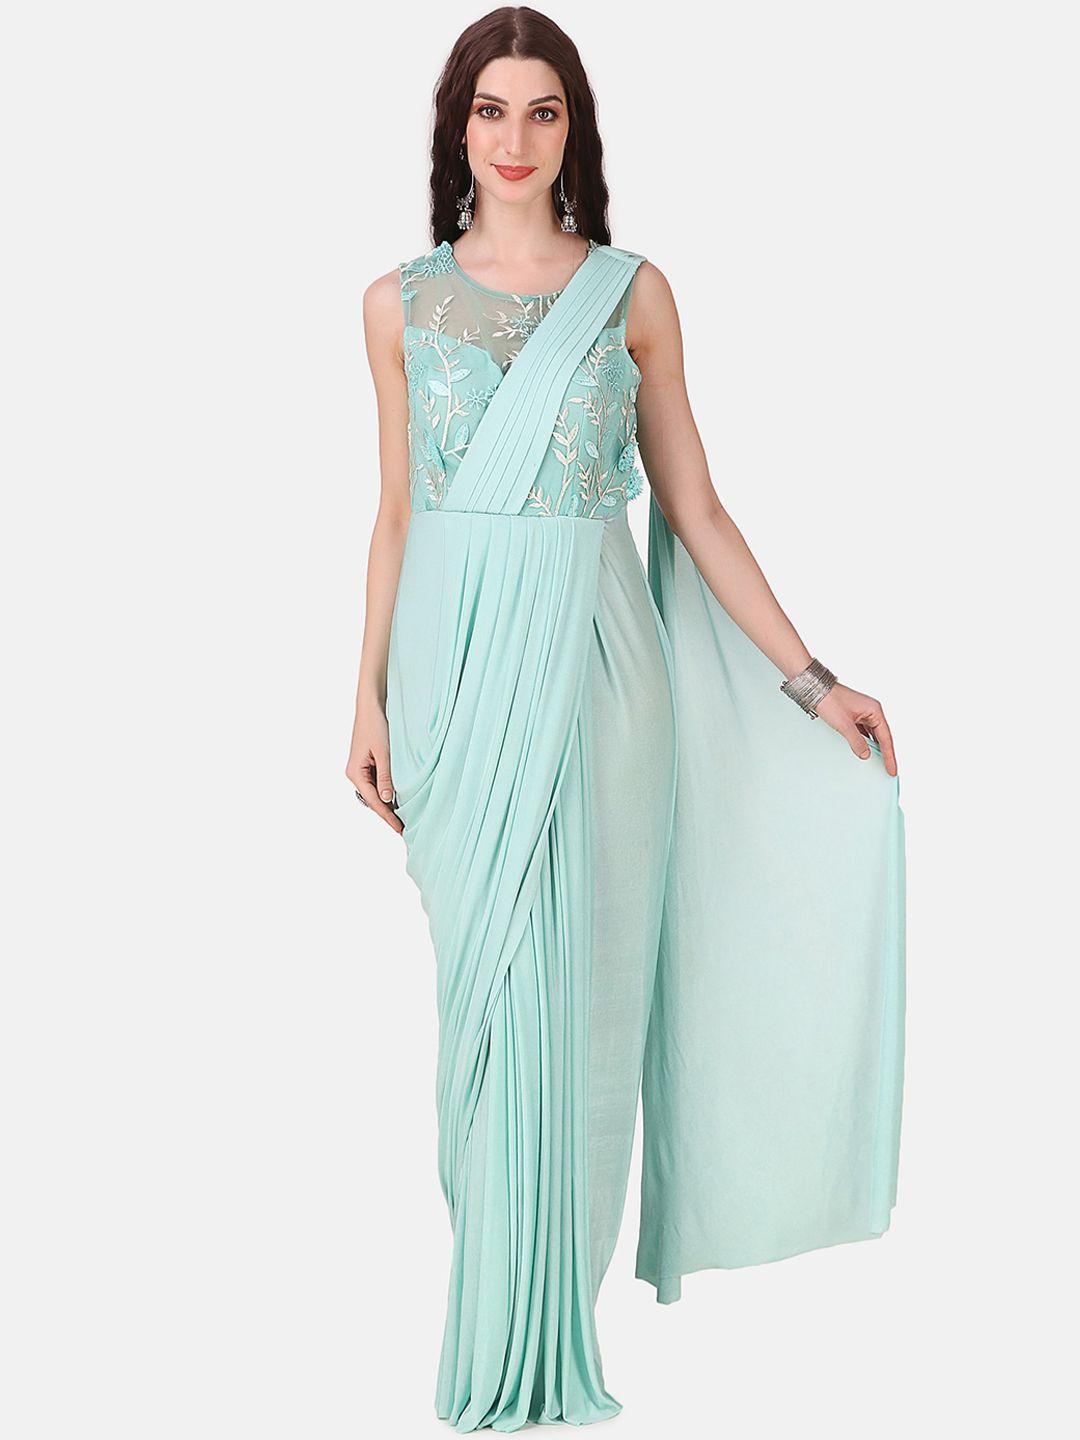 grancy turquoise blue floral embroidered velvet maxi dress